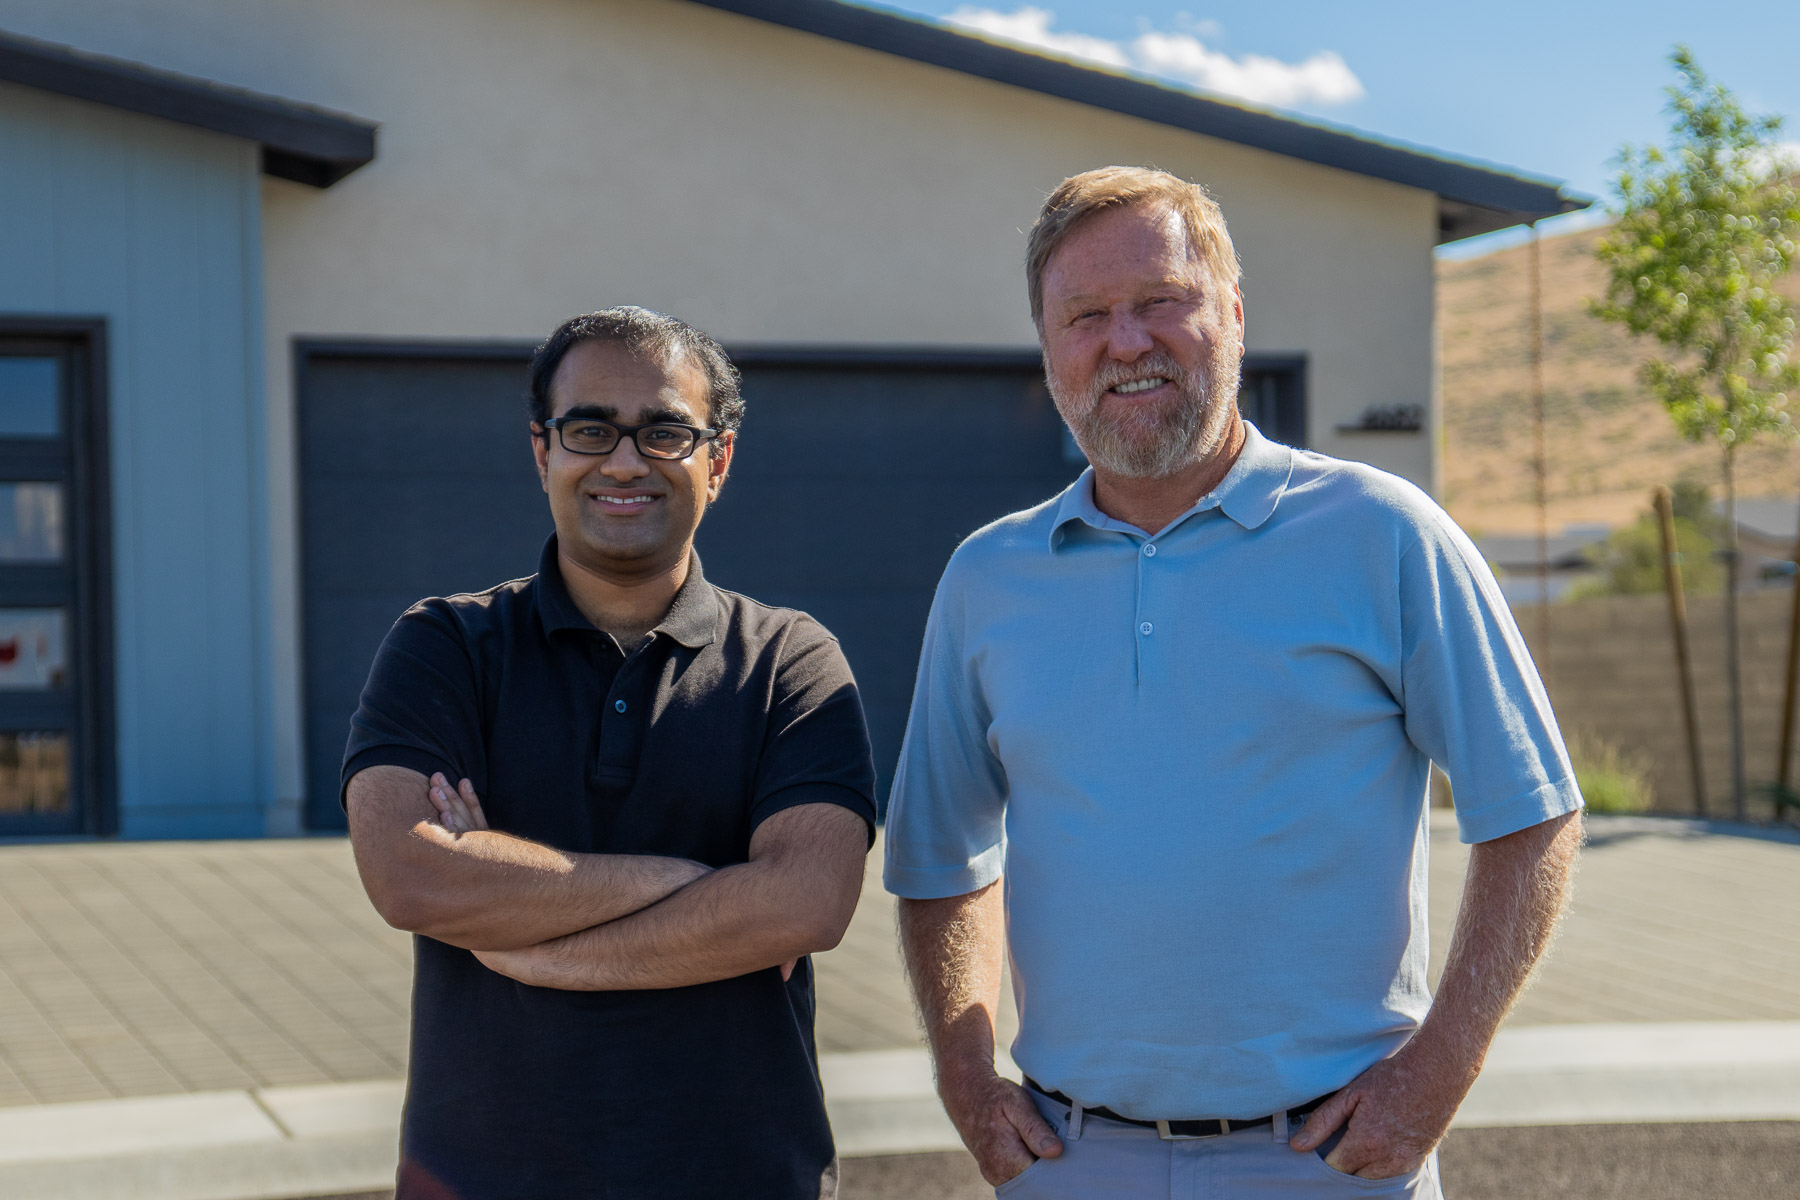 Pictured: Salman Ahmad, CEO and co-founder of Mosaic (l.), and Dave Everson, Owner of Mandalay Homes (r.), an early partner of Mosaic